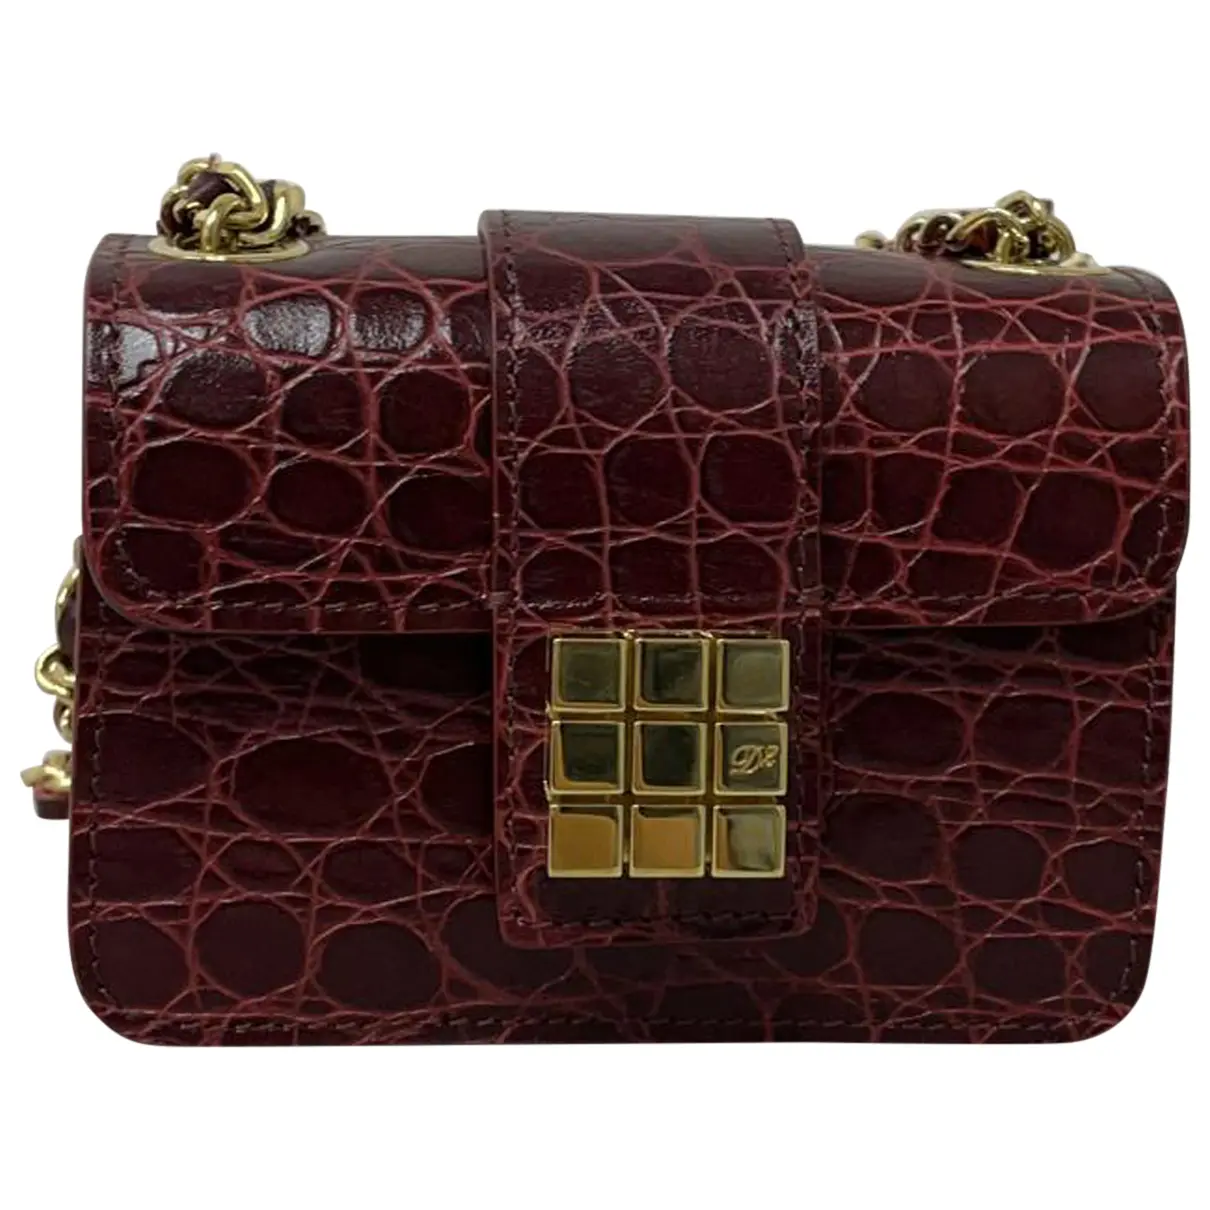 Leather clutch bag Dsquared2